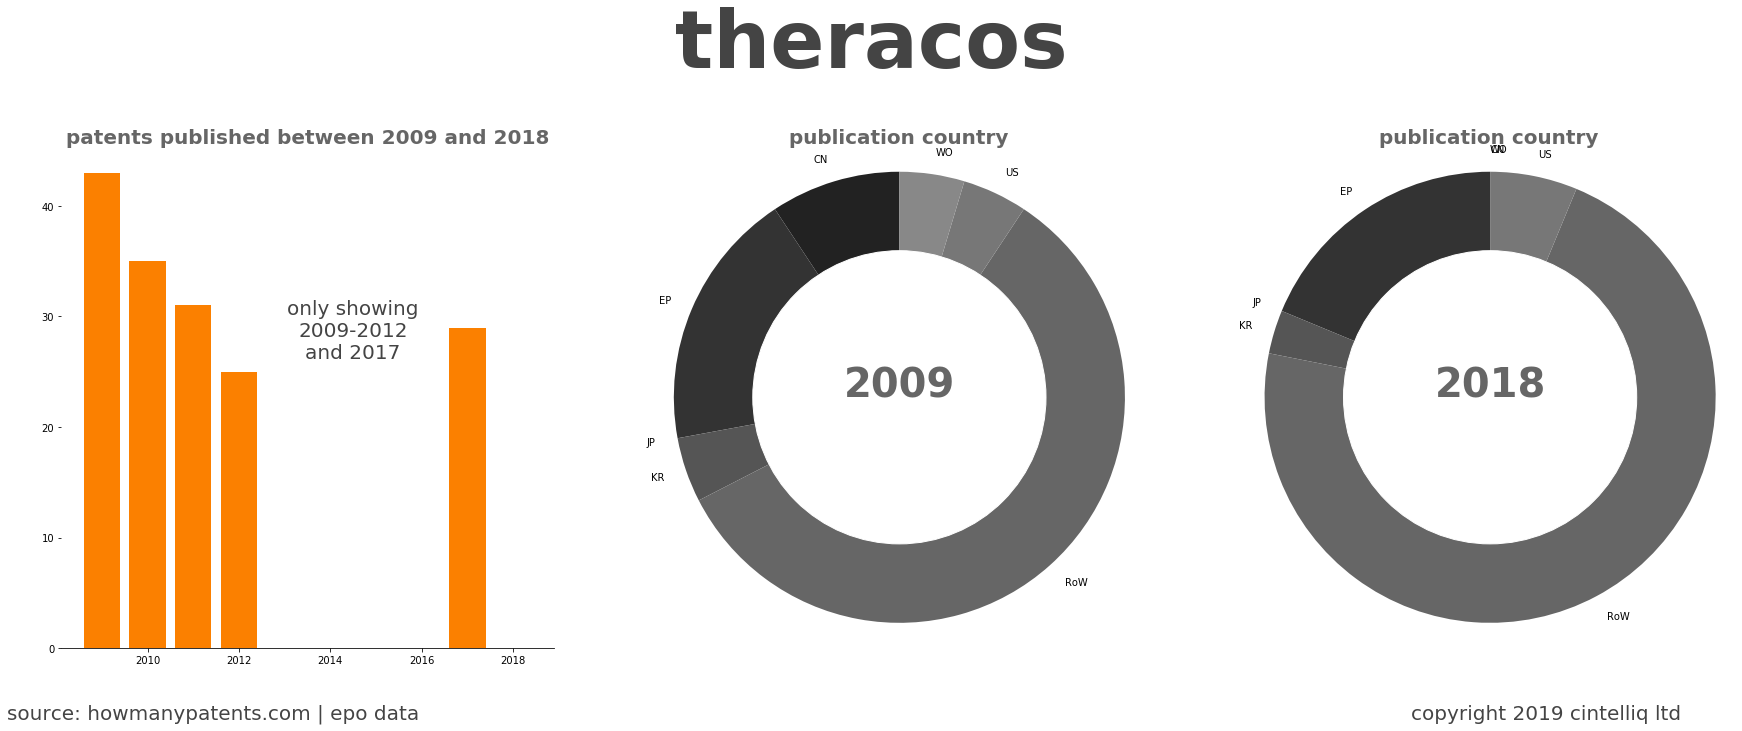 summary of patents for Theracos